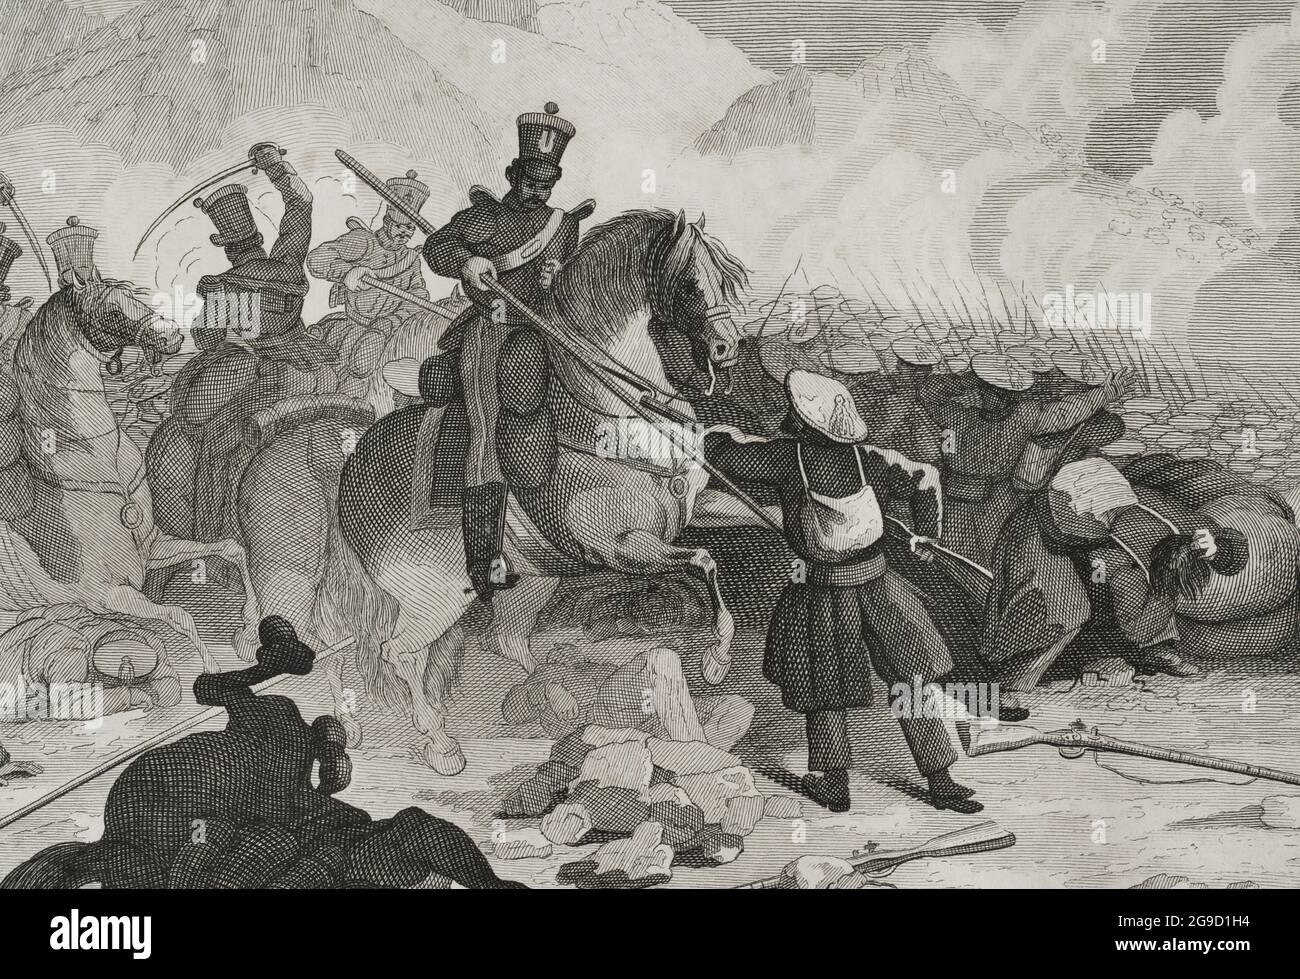 Spain. First Carlist War (1833-1840). Civil war that confronted Carlists, supporters of the Infante Carlos María Isidro de Borbón, against the Isabelinos (Elizabethans), defenders of Isabel II and the regent María Cristina de Borbón. Northern Front. Attack by Liberal troops on the road to Legazpia. Illustration by Manuel Miranda. Engraving by Pedro Celestino Maré. Detail. Panorama Español, Crónica Contemporánea. Madrid, 1842. Author: d. ca.1880). Spanish engraver. MANUEL MIRANDA. 19th century Spanish artist. Pedro Celestino Maré (fl.1842-1862. Stock Photo